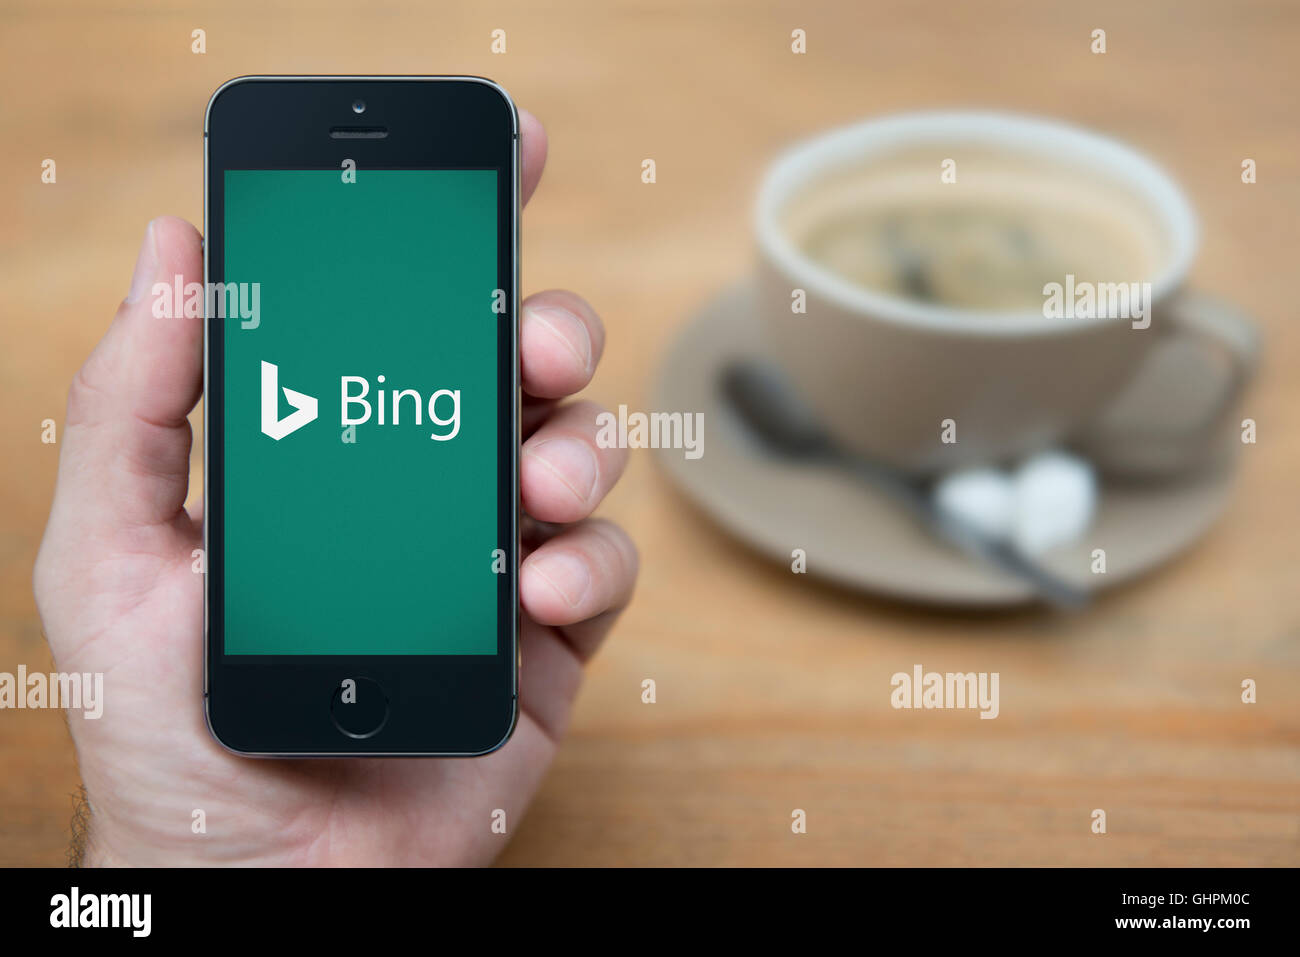 A man looks at his iPhone which displays the Bing logo, while sat with a cup of coffee (Editorial use only). Stock Photo